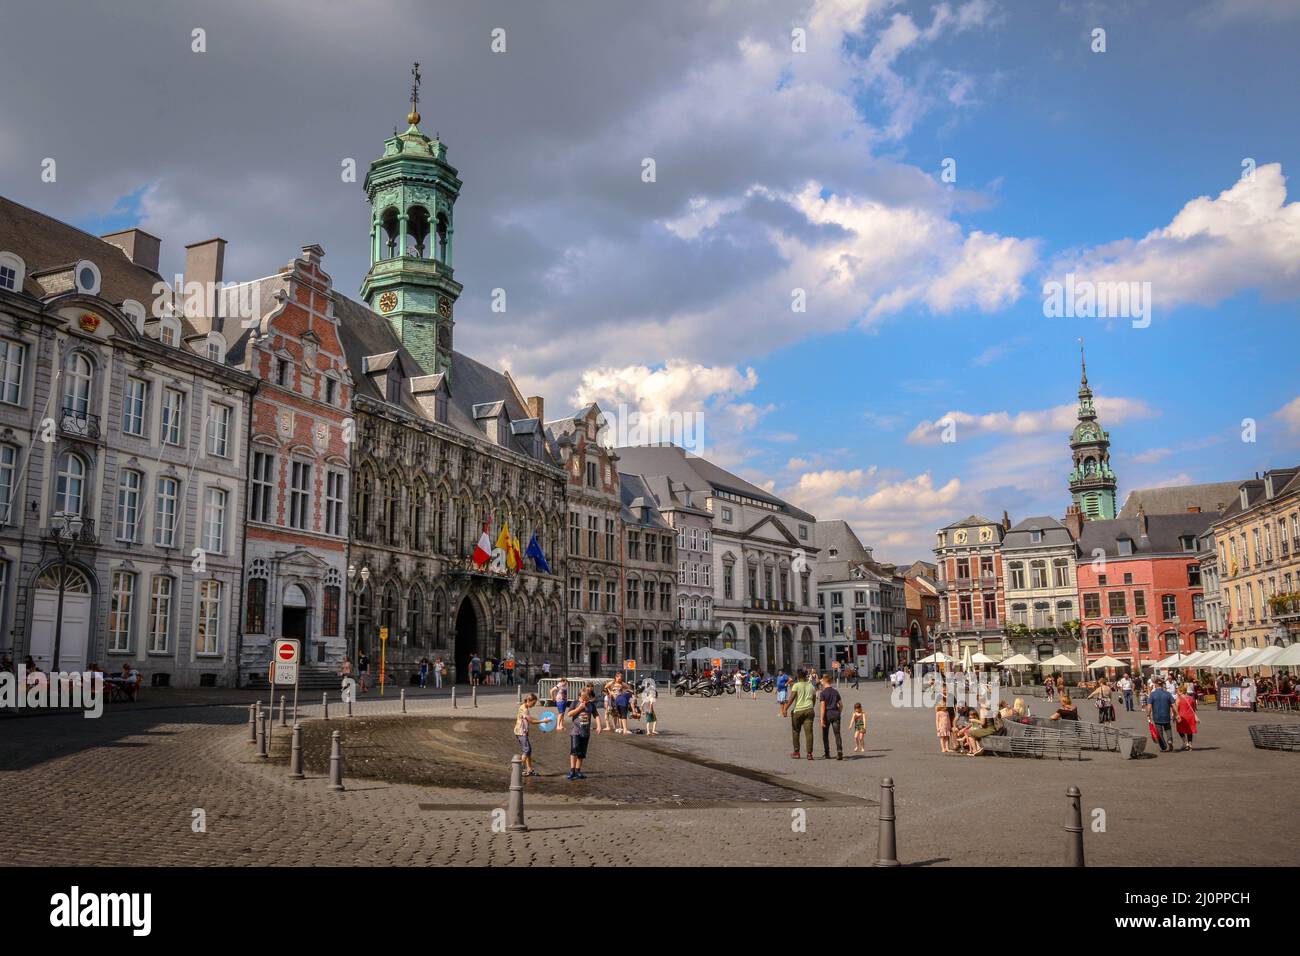 The City Hall of the city of Mons, Belgium Stock Photo